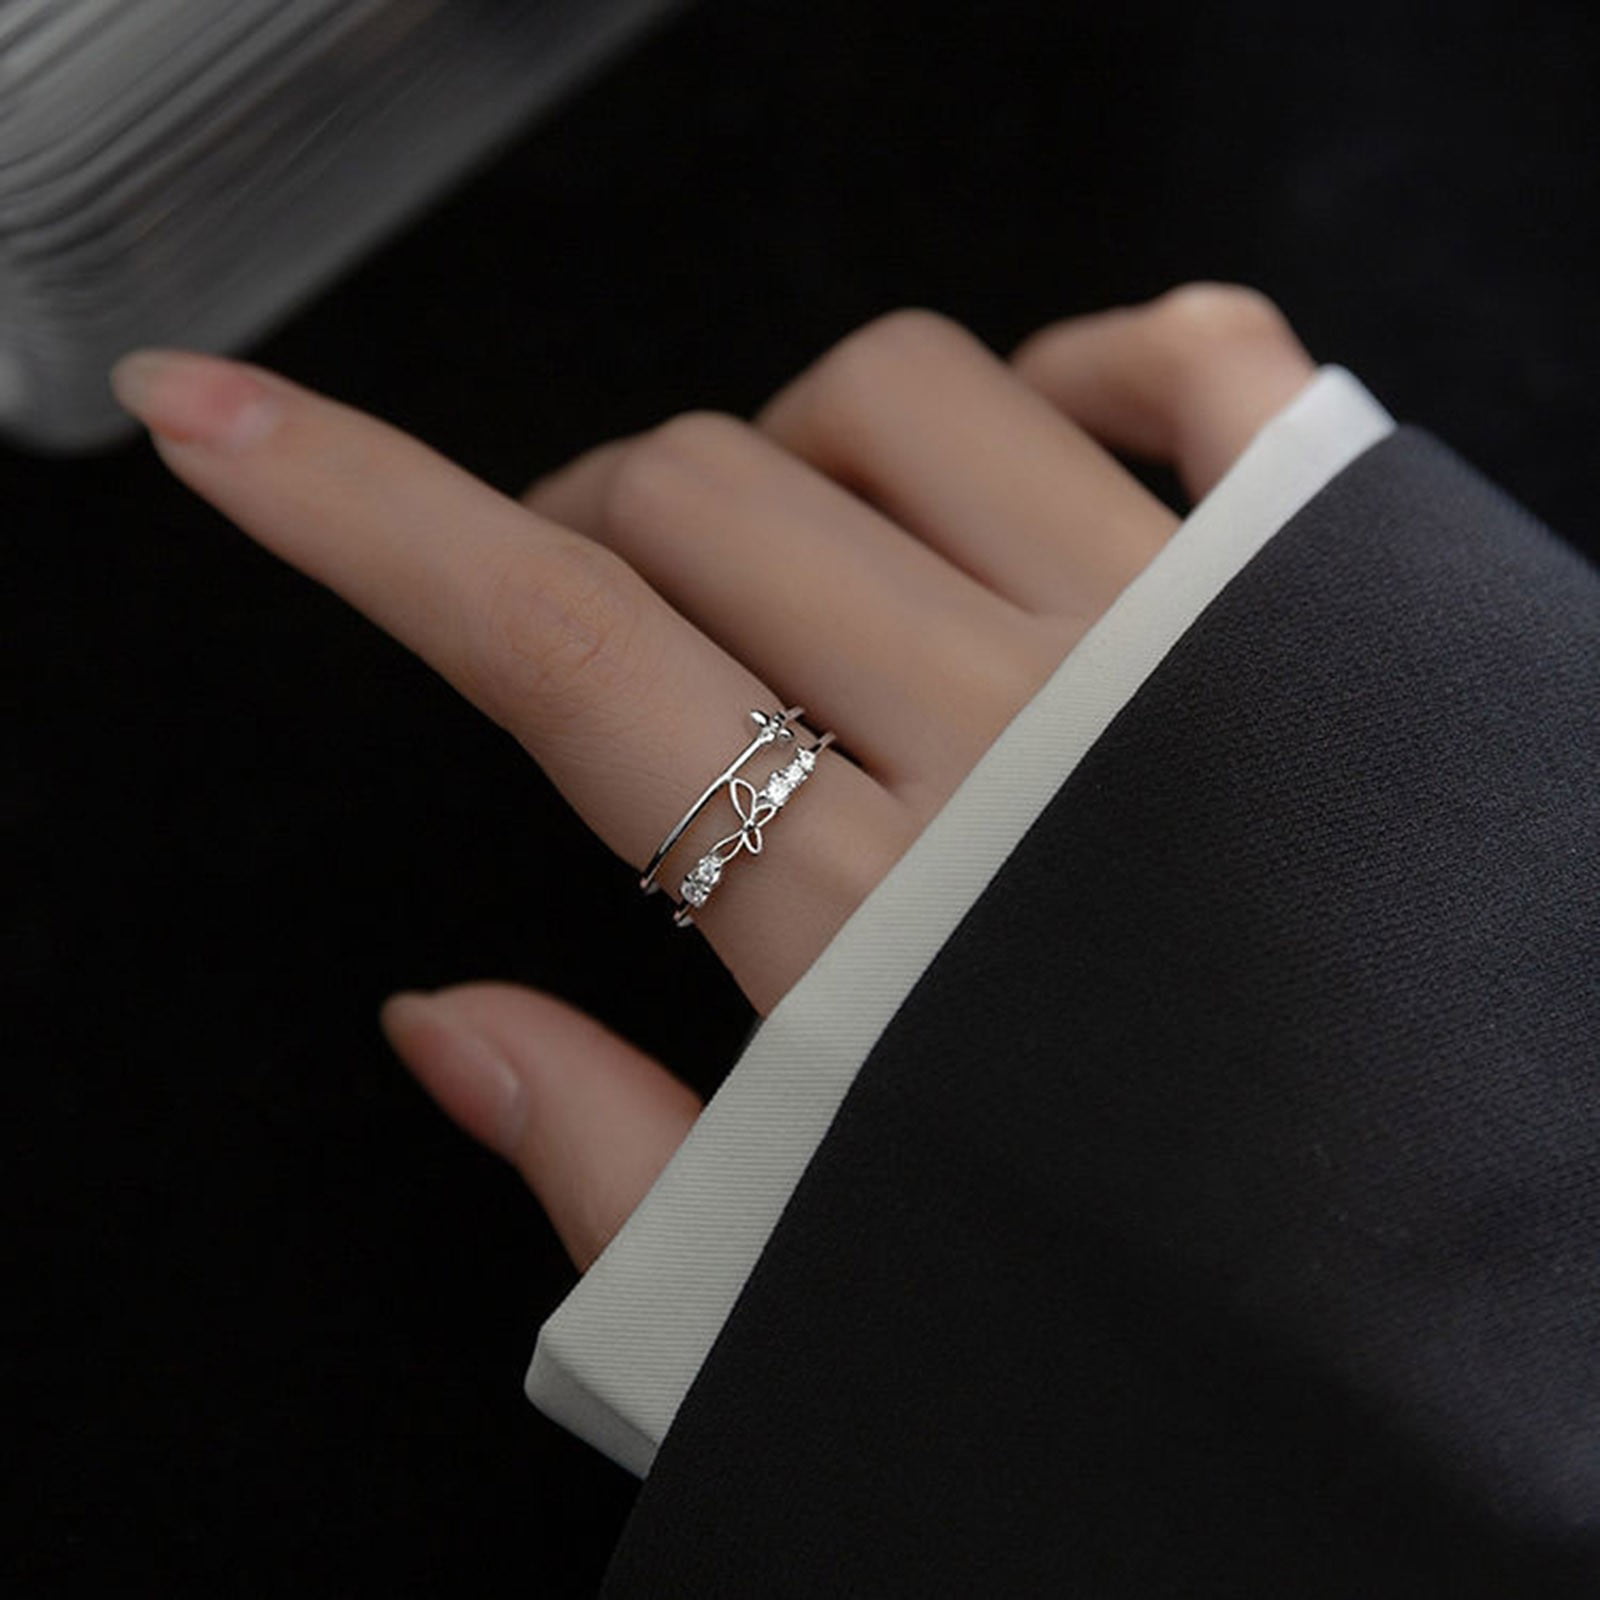 Jewelry for Women Rings Bohemian Ring Worry Ring Plain Hammer Belt Ring Love Ring Men and Women Cute Ring Pack Trendy Jewelry Gift for Her, Adult